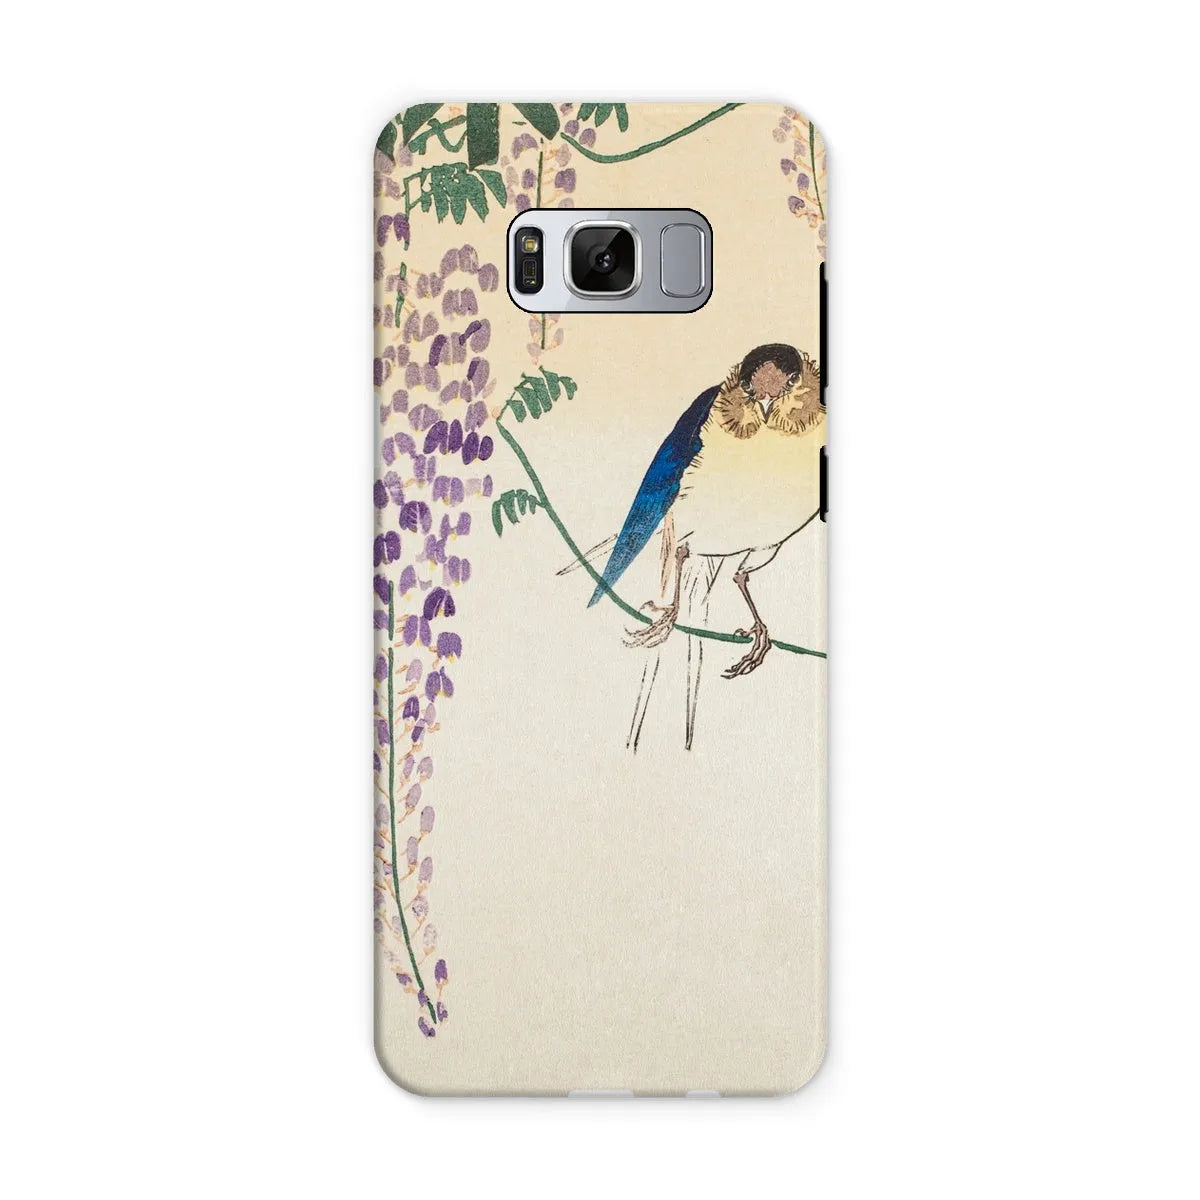 Wisteria And Swallow - Japanese Art Phone Case - Ohara Koson - Samsung Galaxy S8 / Matte - Mobile Phone Cases